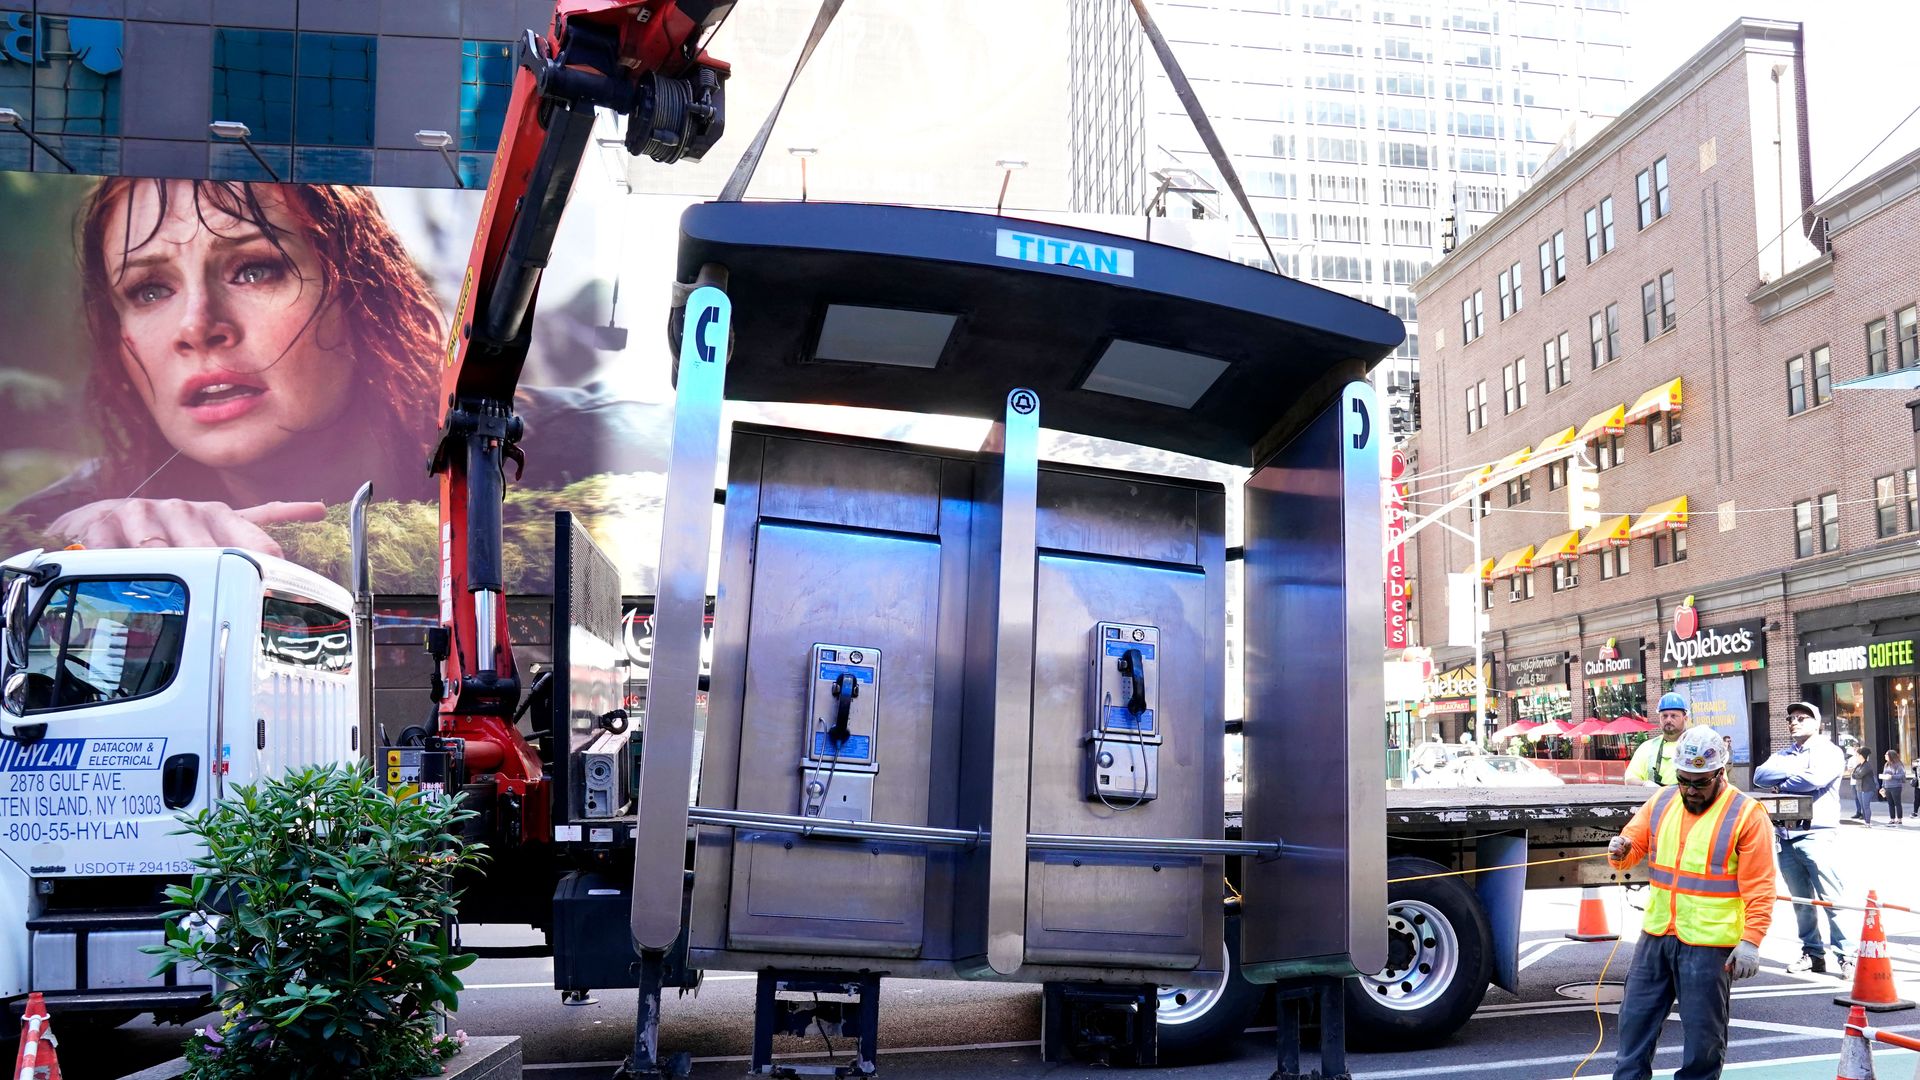 A crane removes a block of two payphones from a sidewalk in New York City